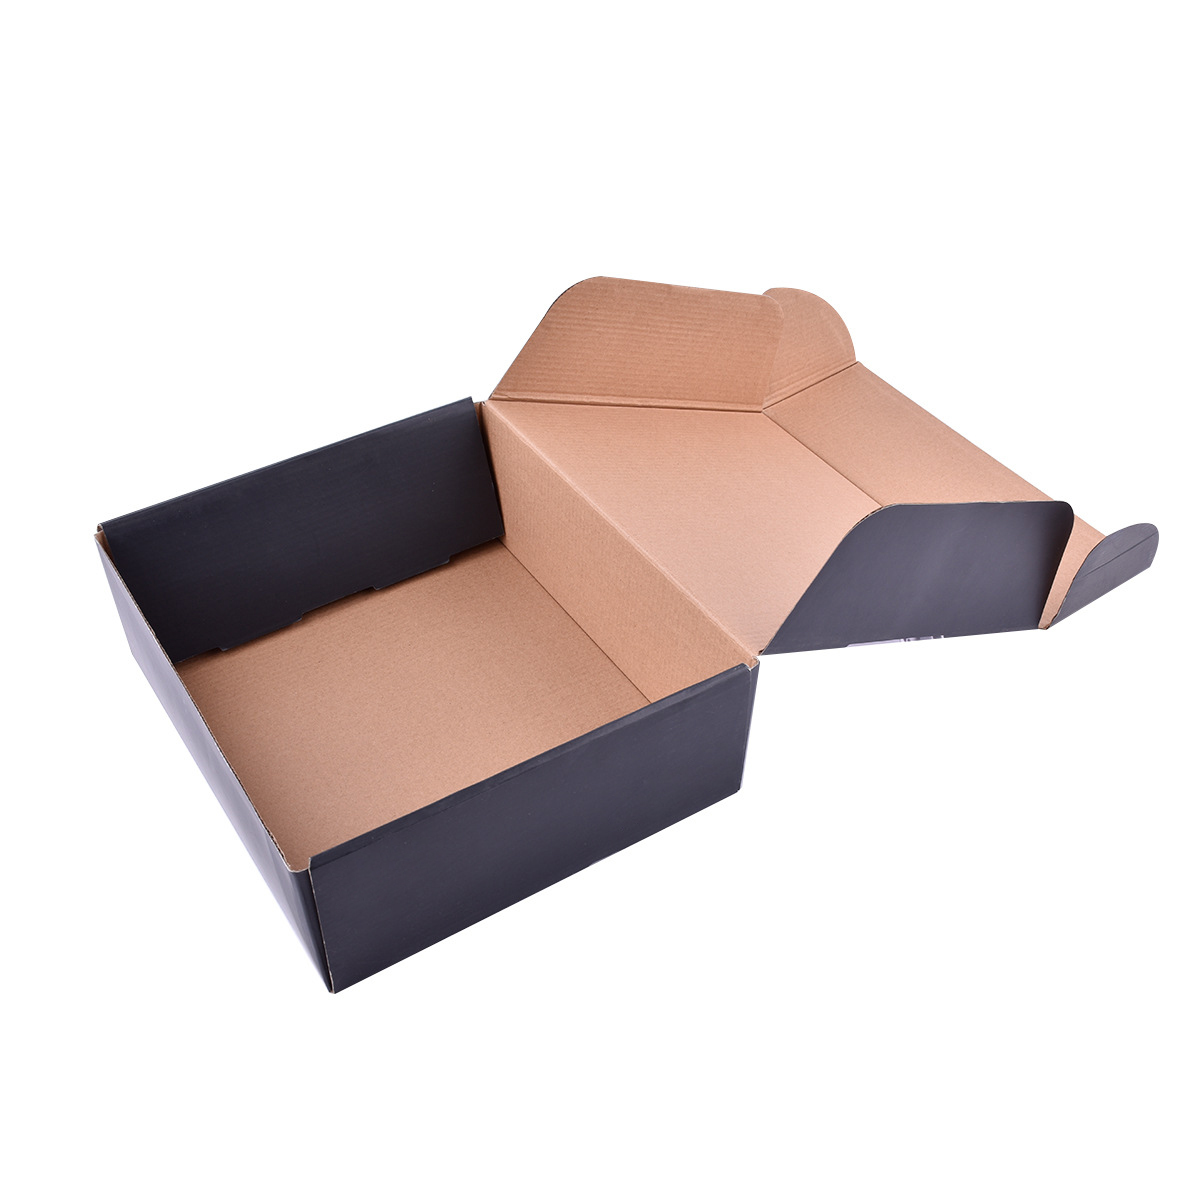 What are mailer boxes used for?